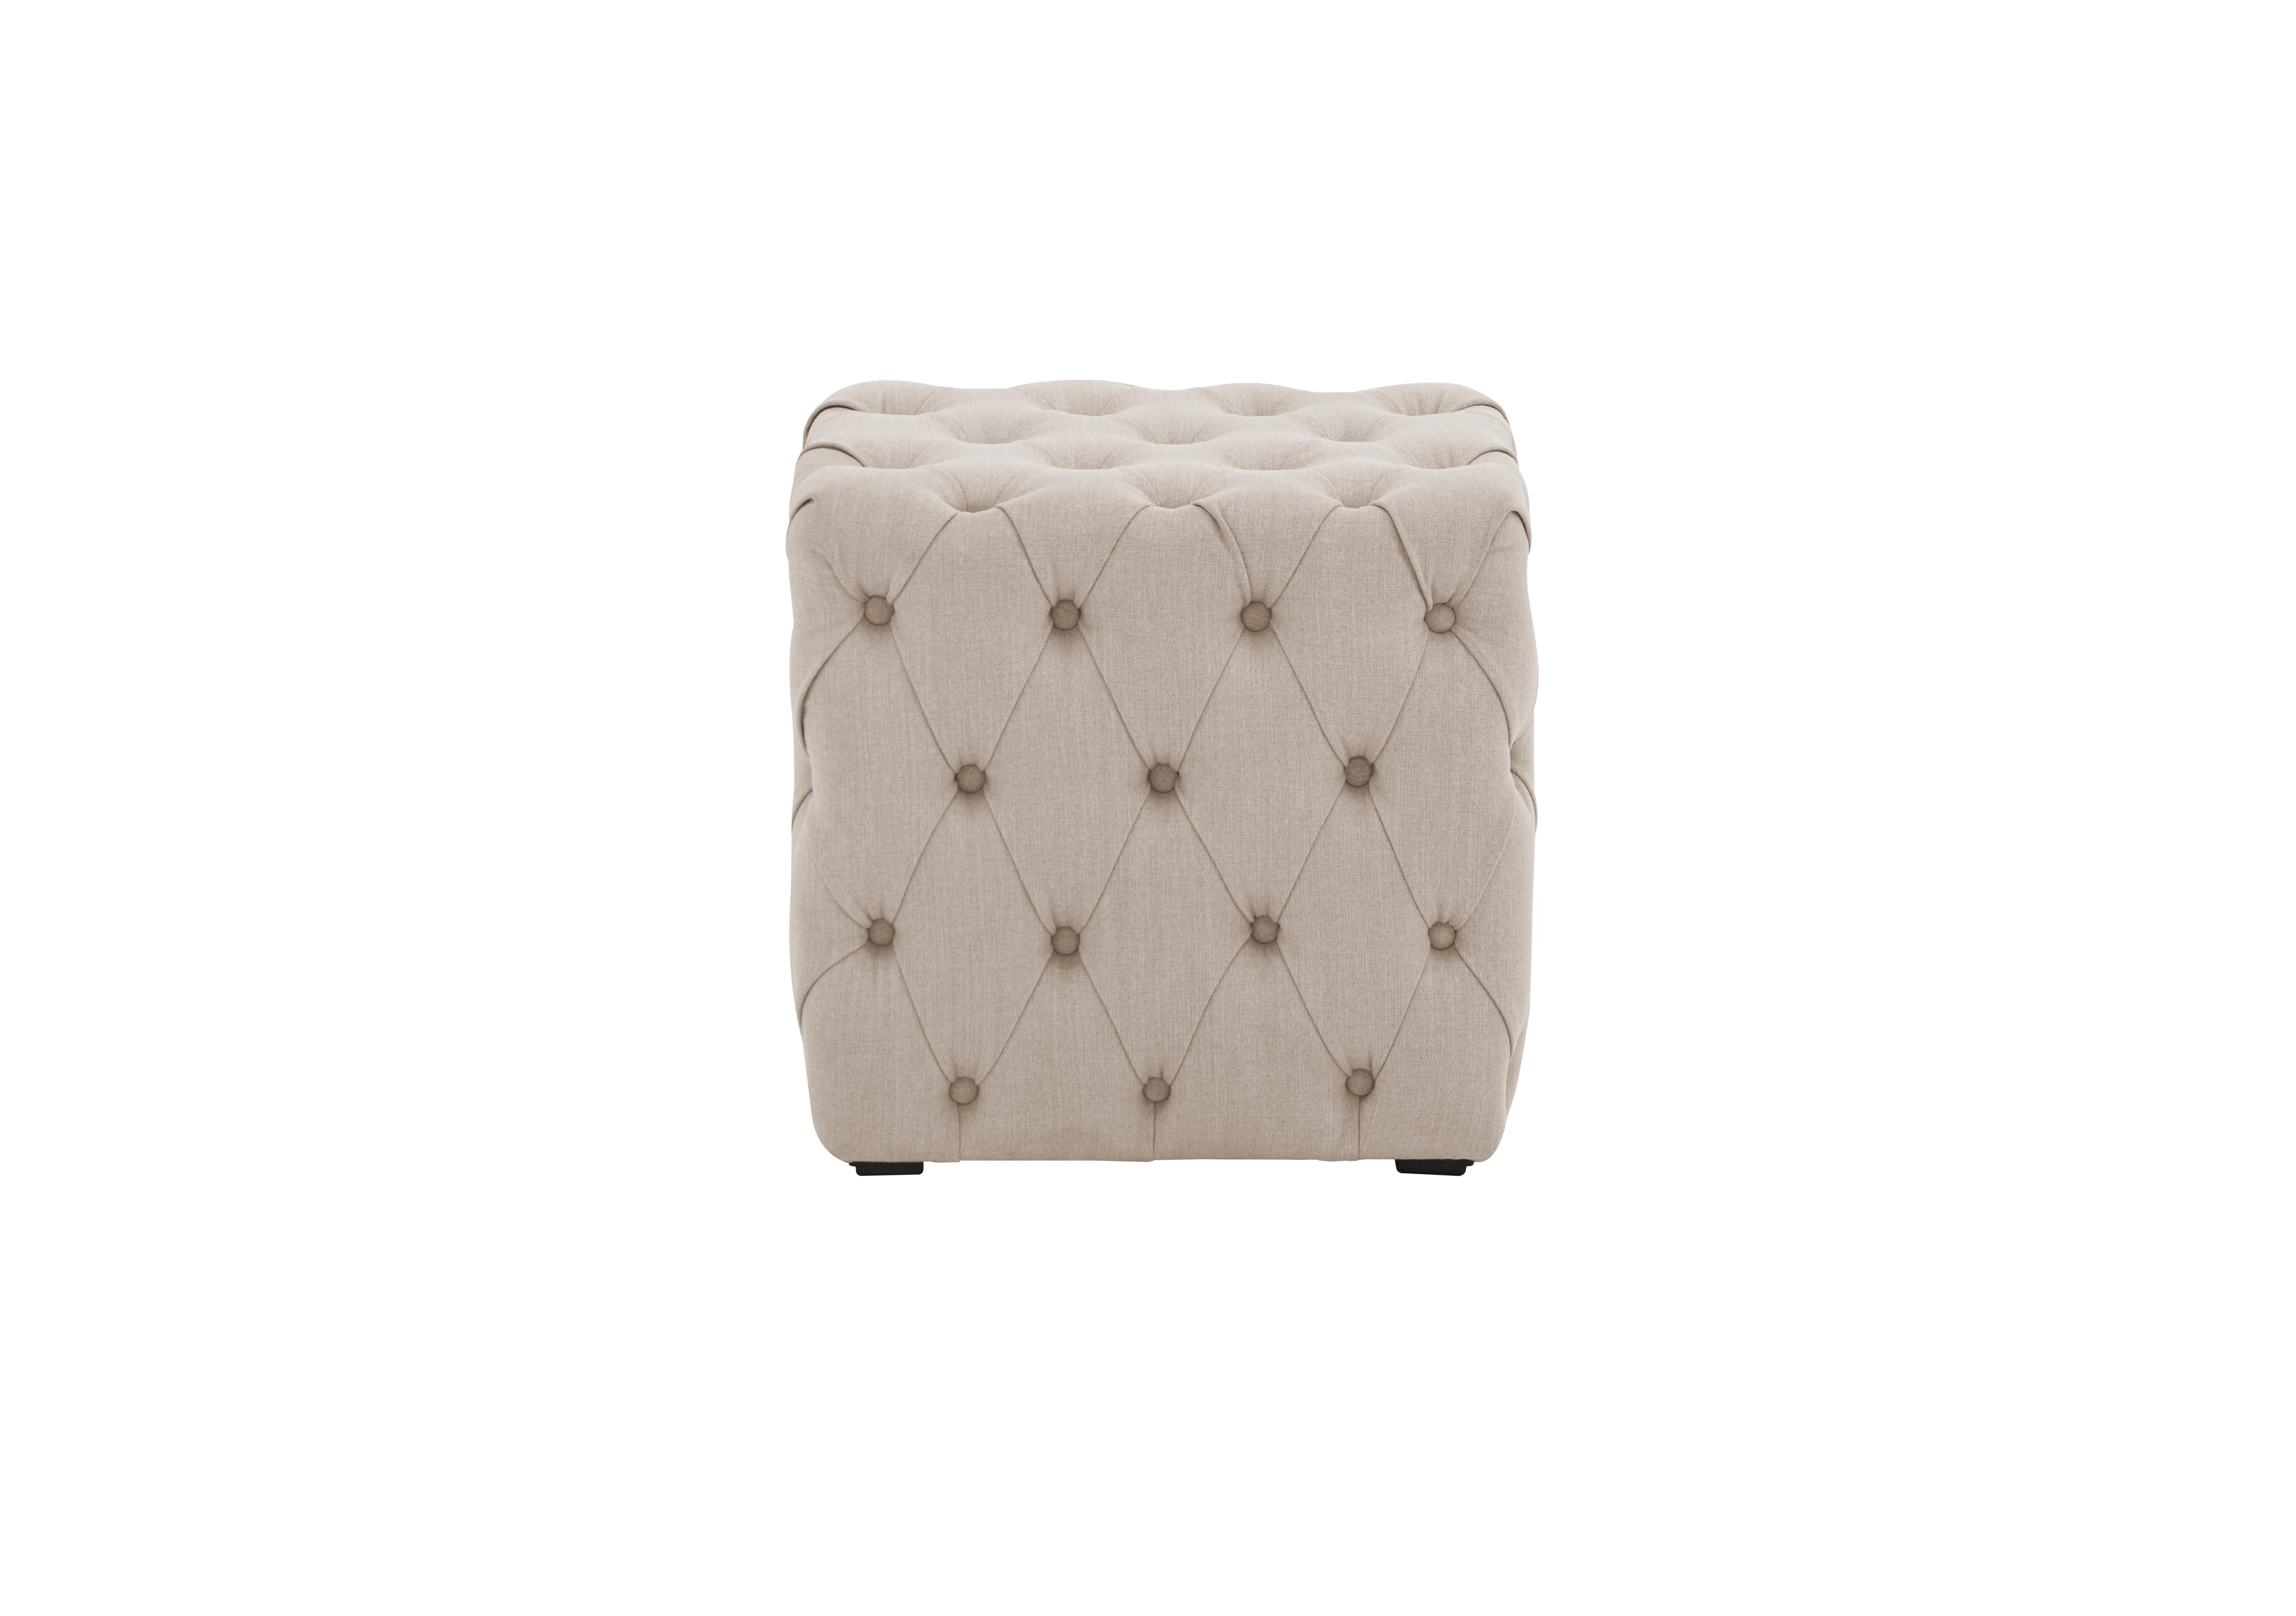 Evie Cube in Linnet Clay on Furniture Village